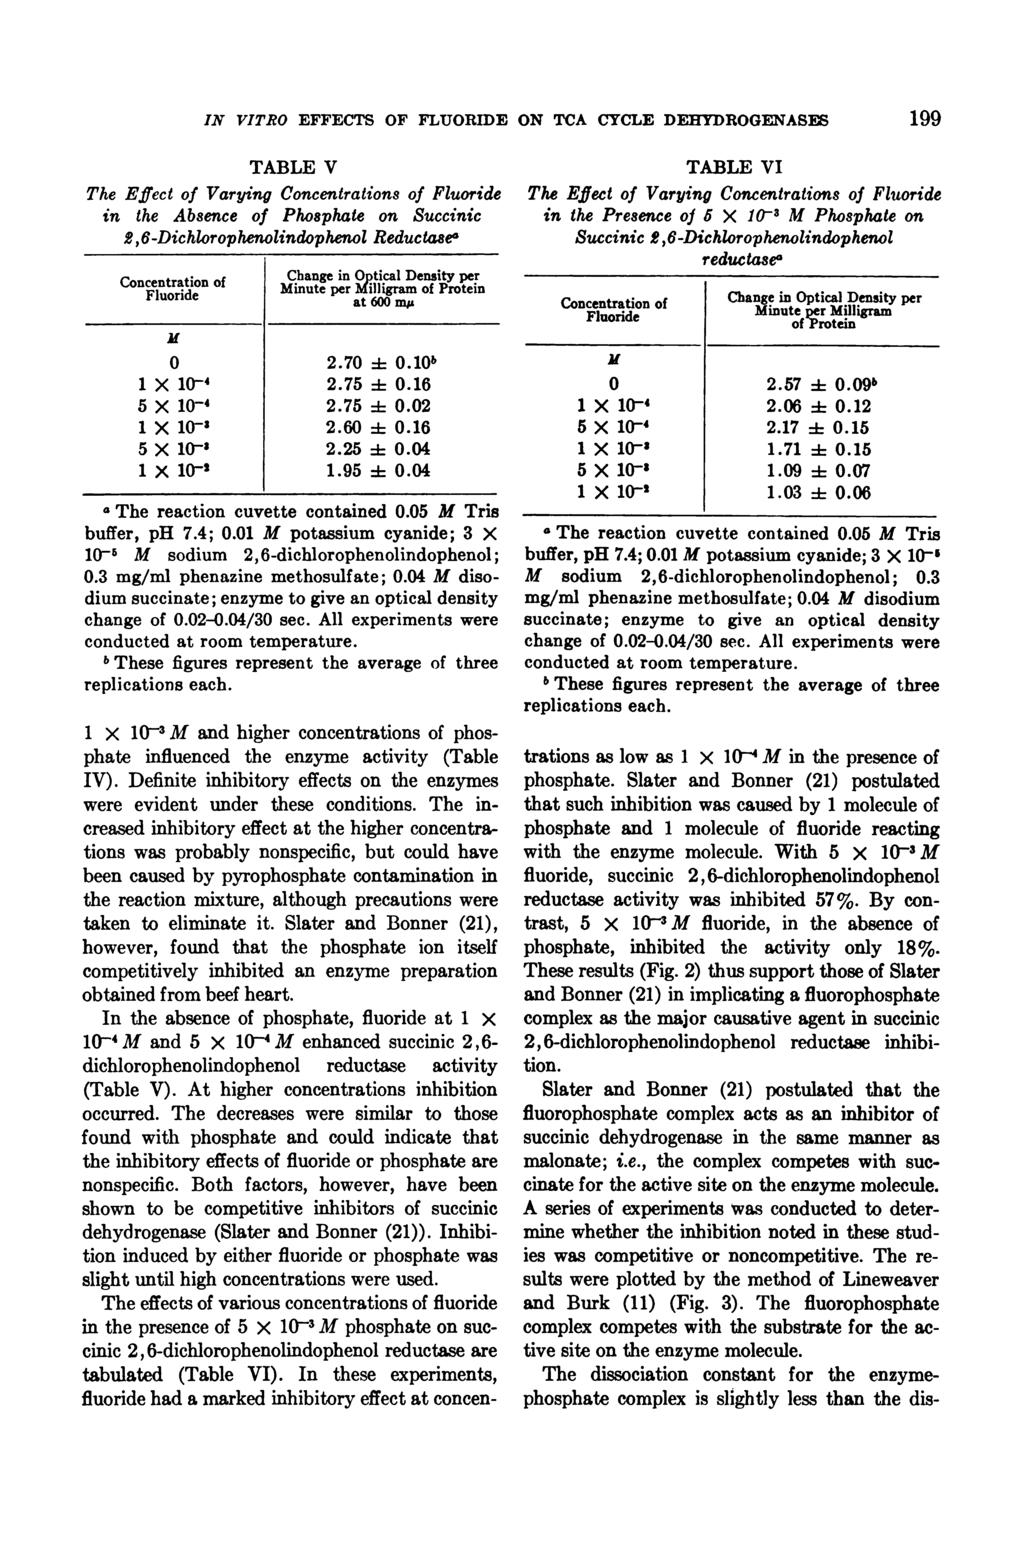 IN VITRO EFFECTS OF FLUORIDE ON TCA CYCLE DEHYDROGENASES 199 The Effect Varying s in the Absence Phosphate on Succinic 2,6-Dichlorophenolindophenol Reductase 1 X 1-i 5X1-2 1 x 1- V Change in Outical